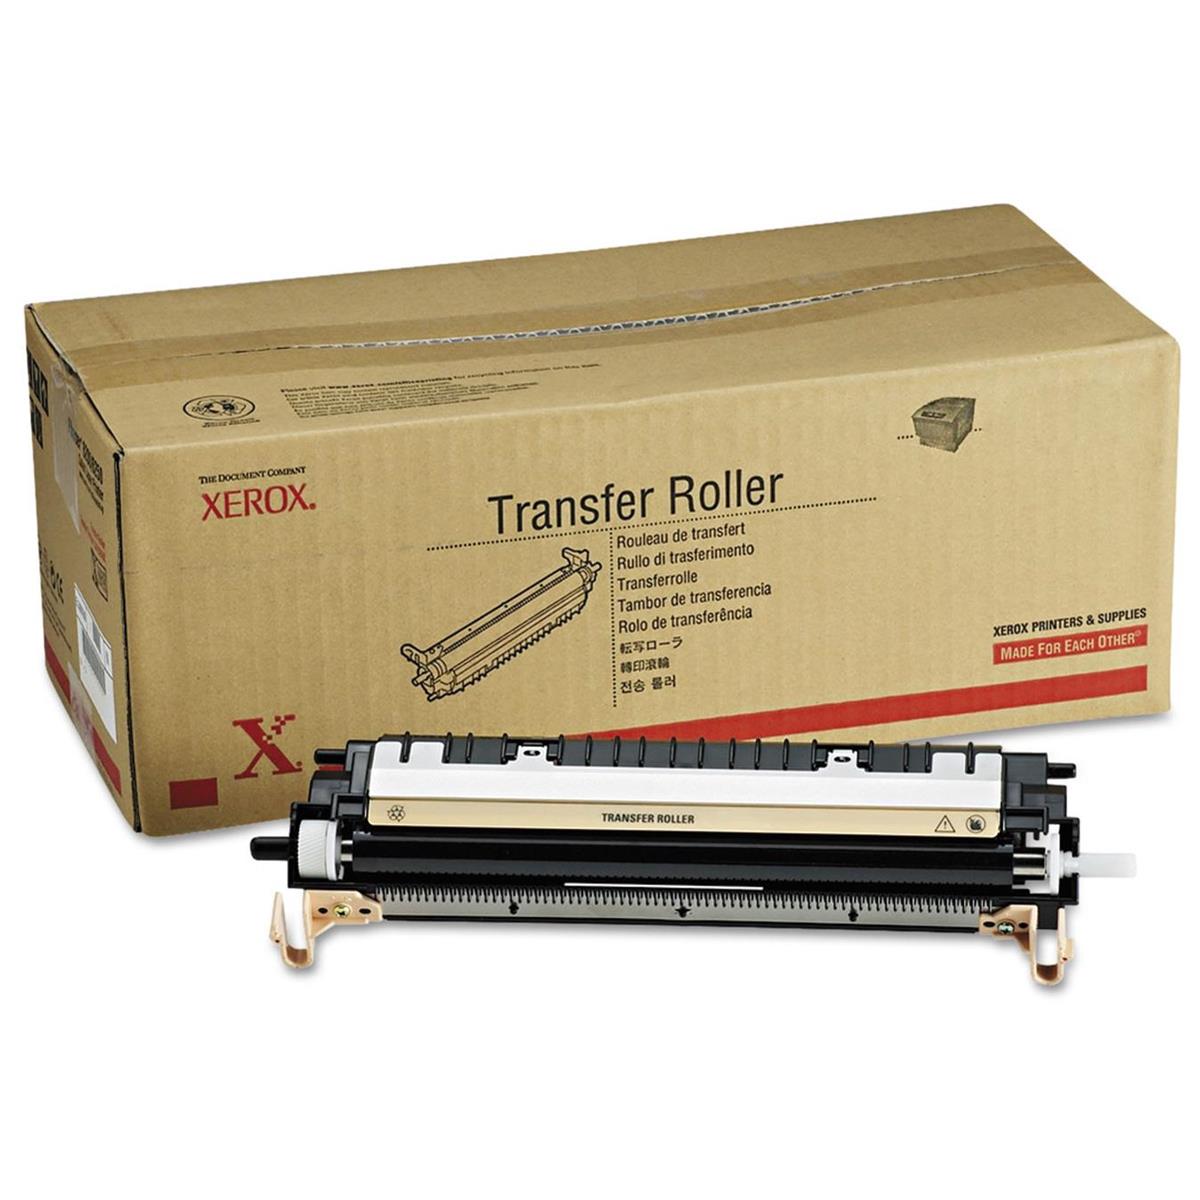 Image of Xerox Transfer Roller for Phaser 7800 Color Printer